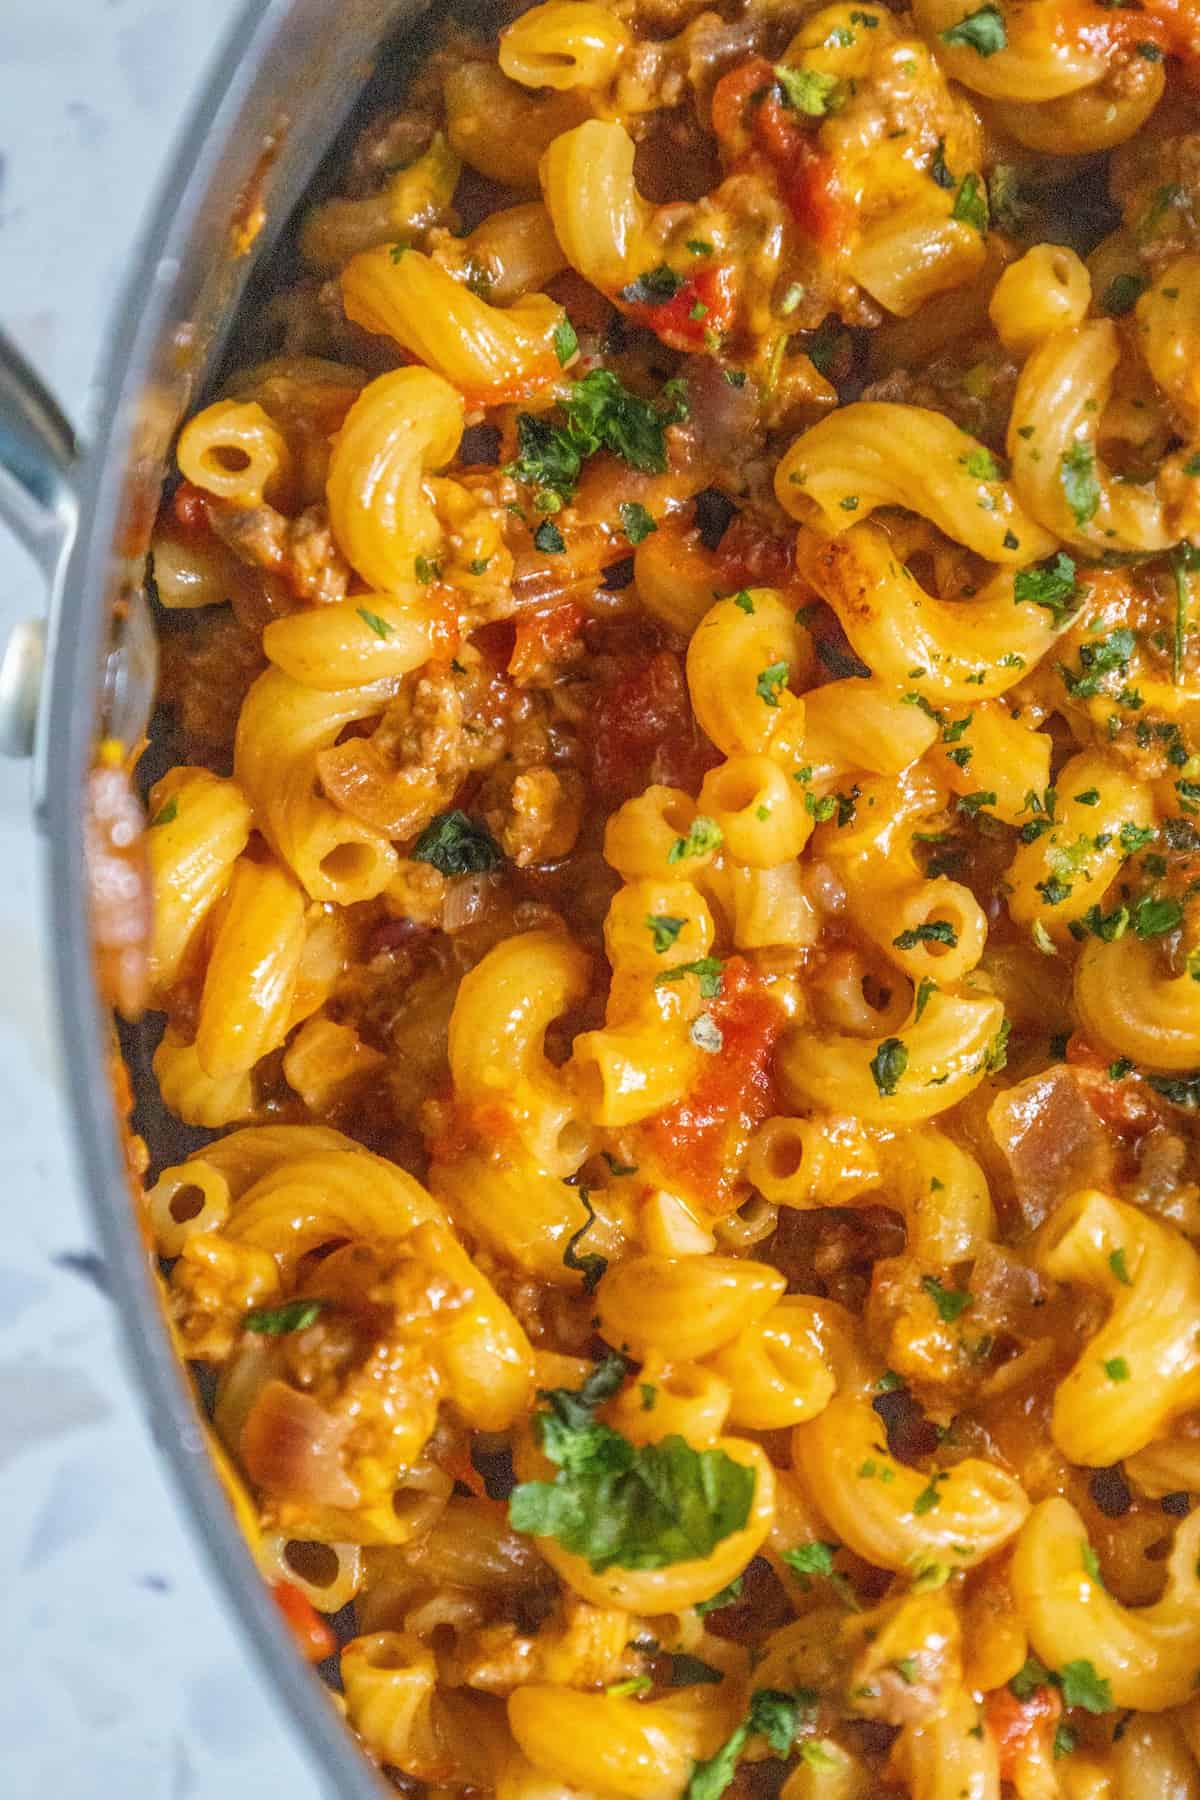 An American recipe for goulash, a pan full of pasta with tomatoes and herbs.